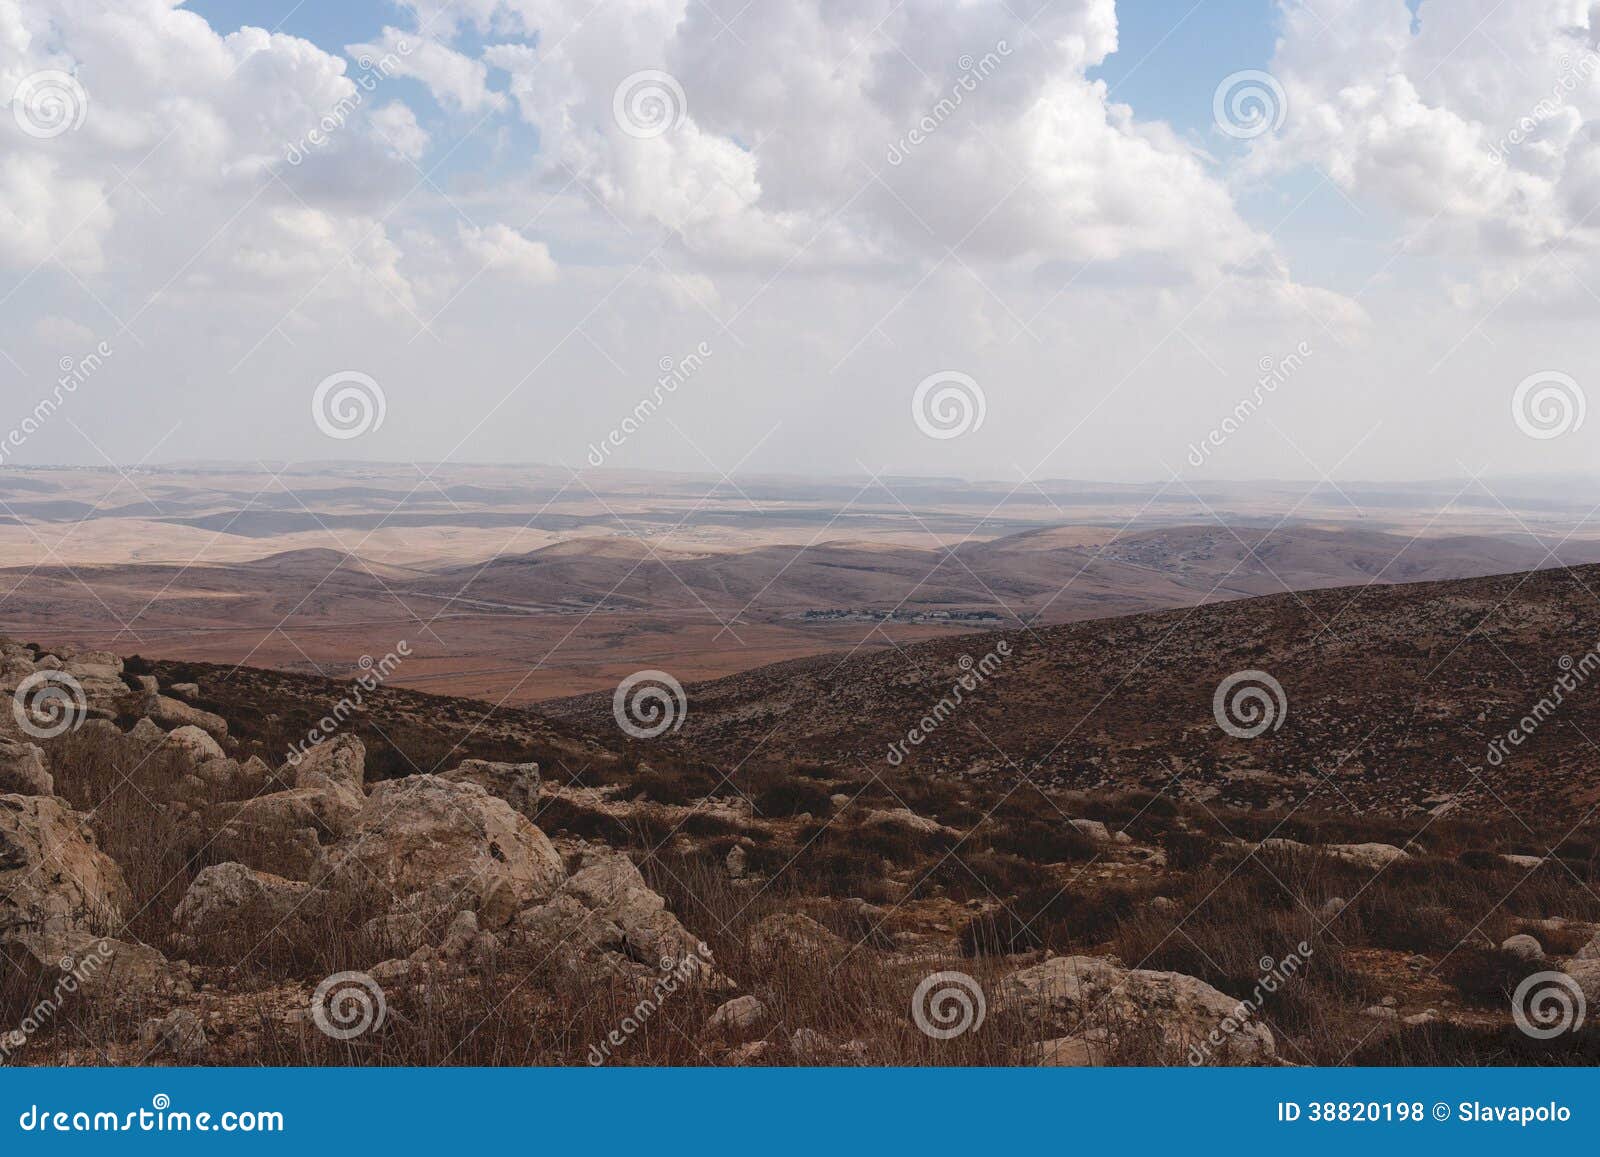 slopes of hebron mountain with negev desert